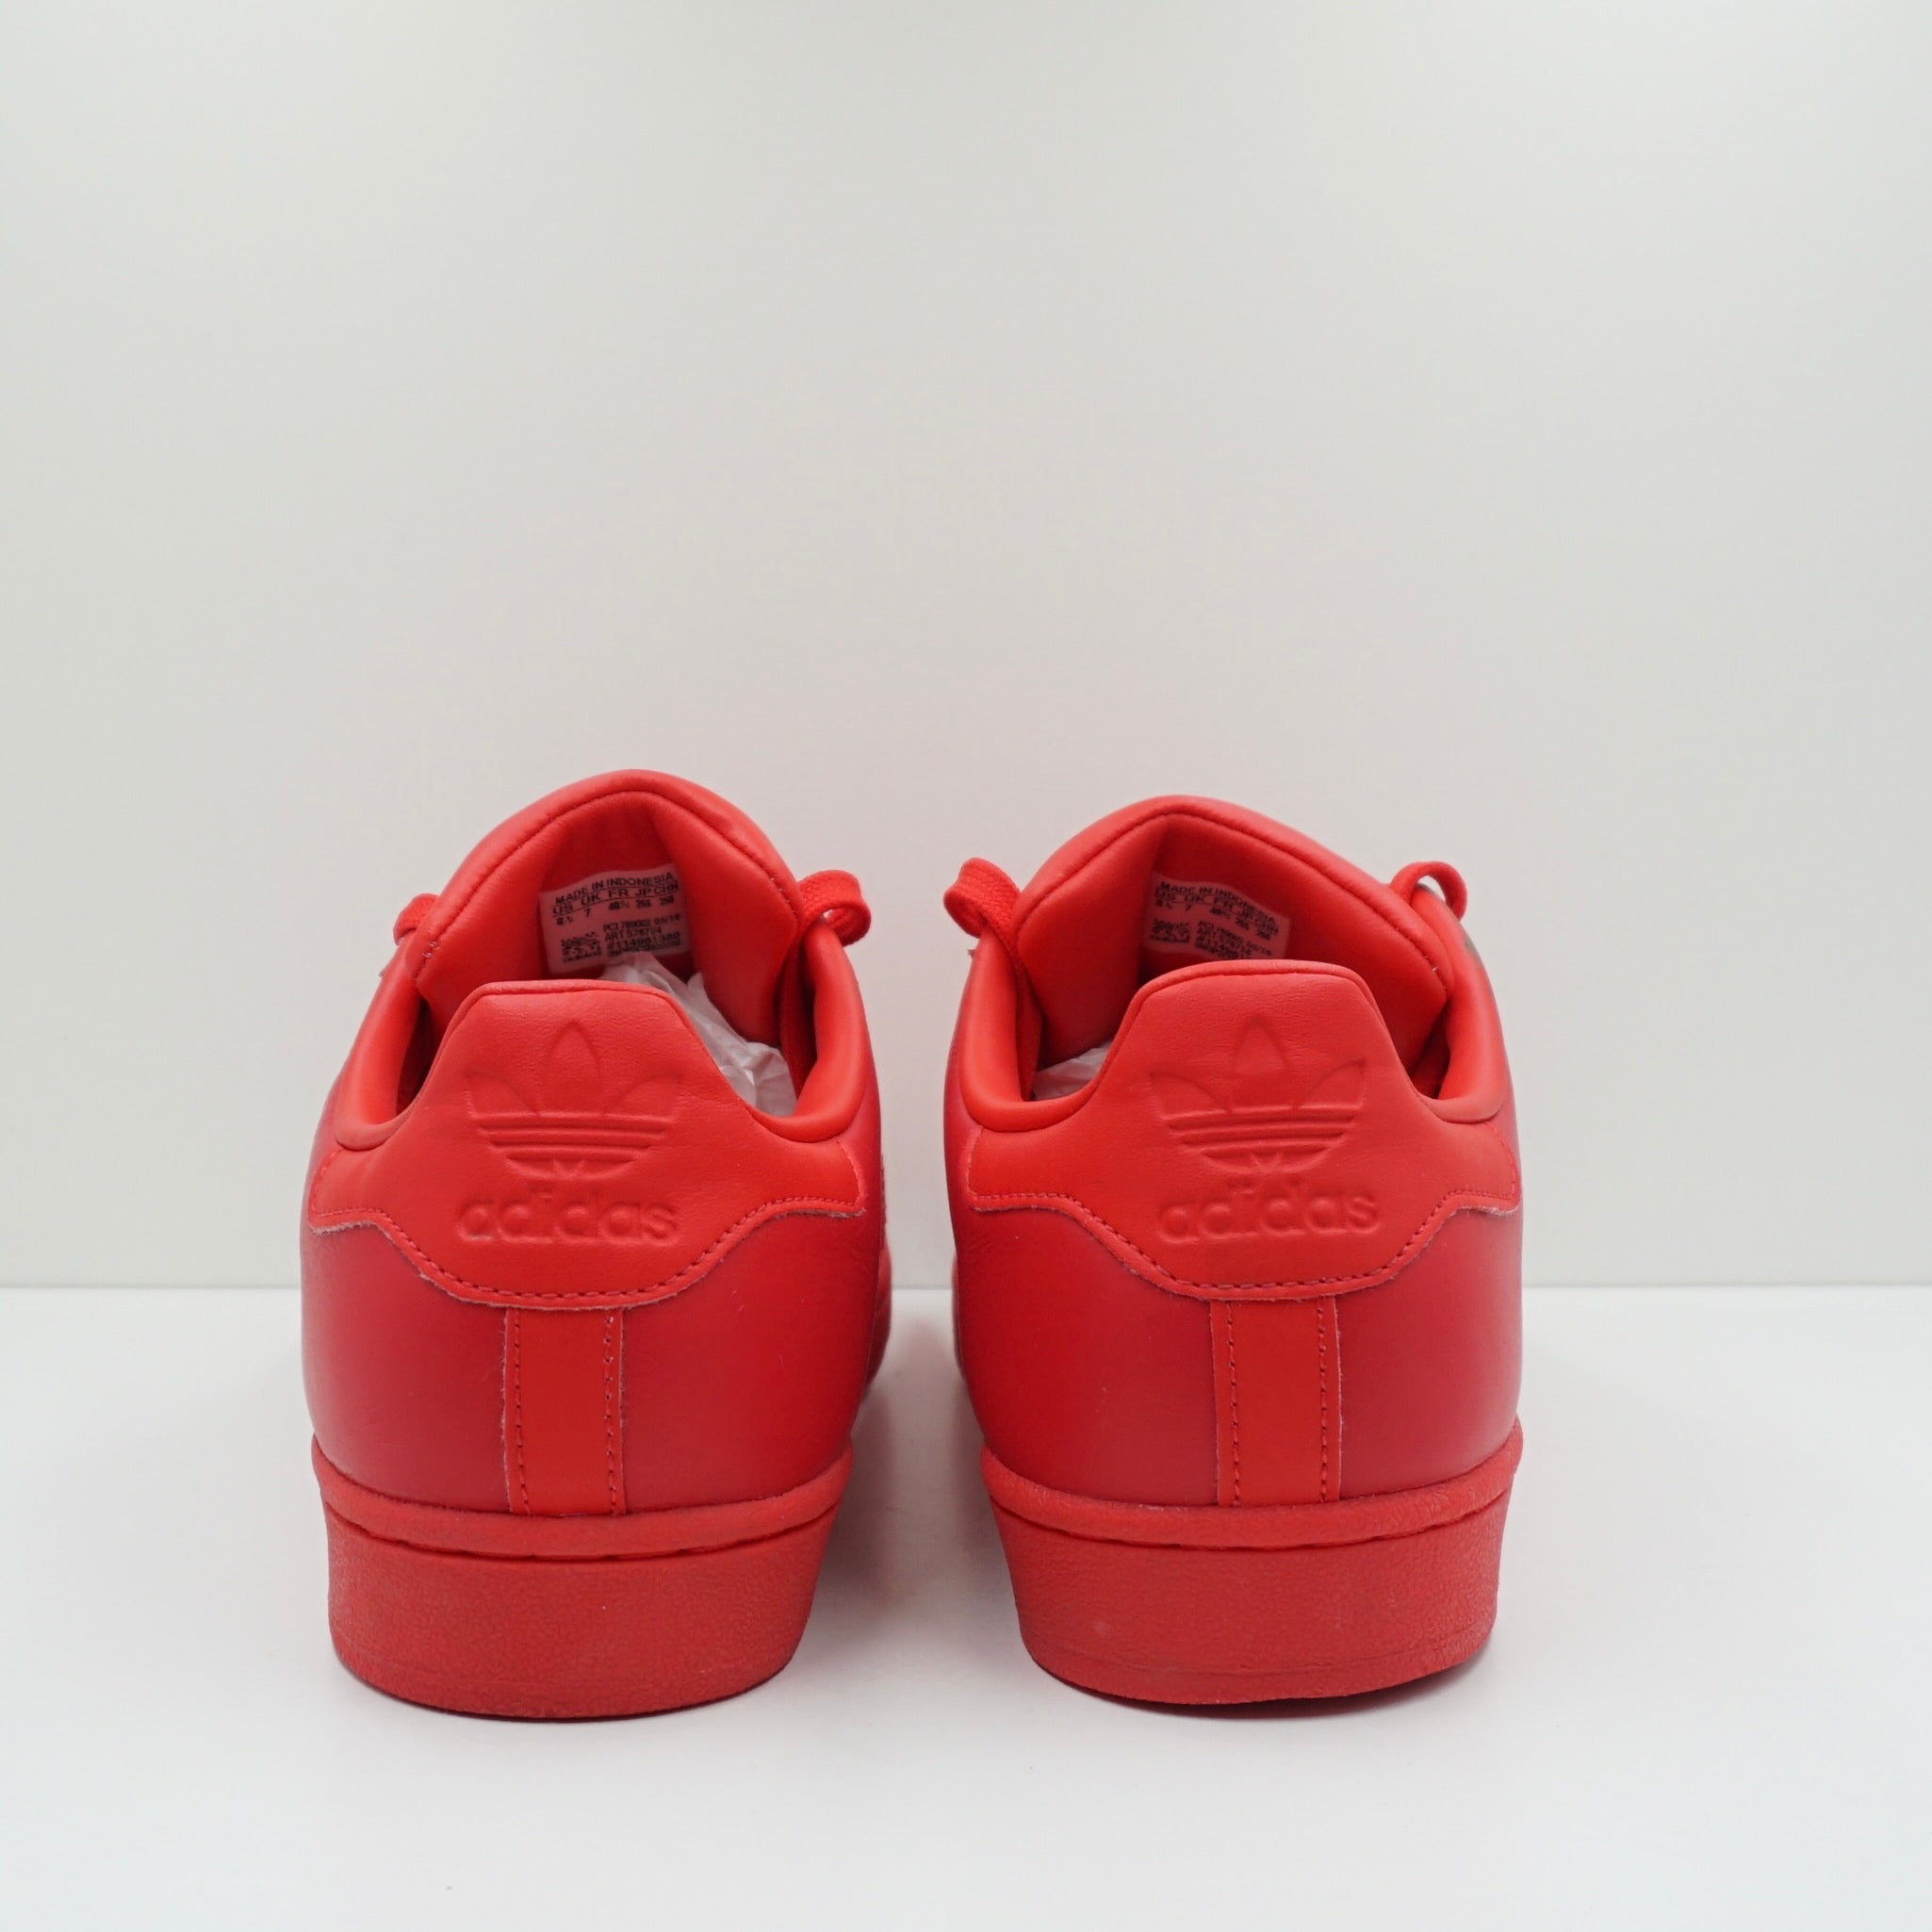 Adidas Superstar Glossy Toe Ray Red (W)